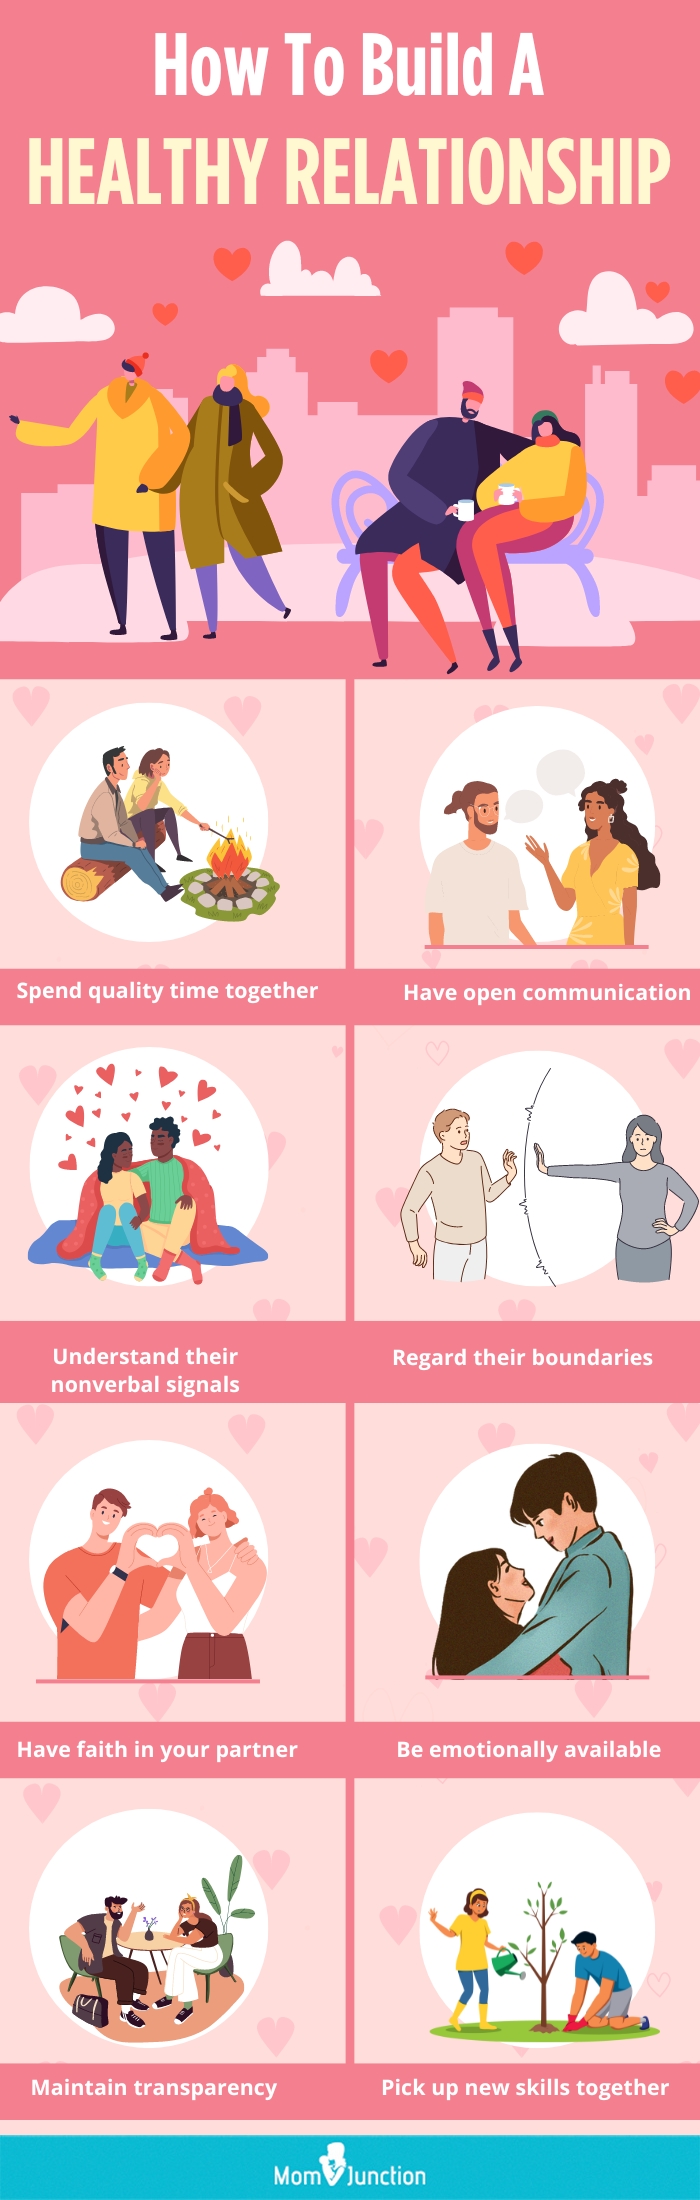 how to build a healthy relationship (infographic)